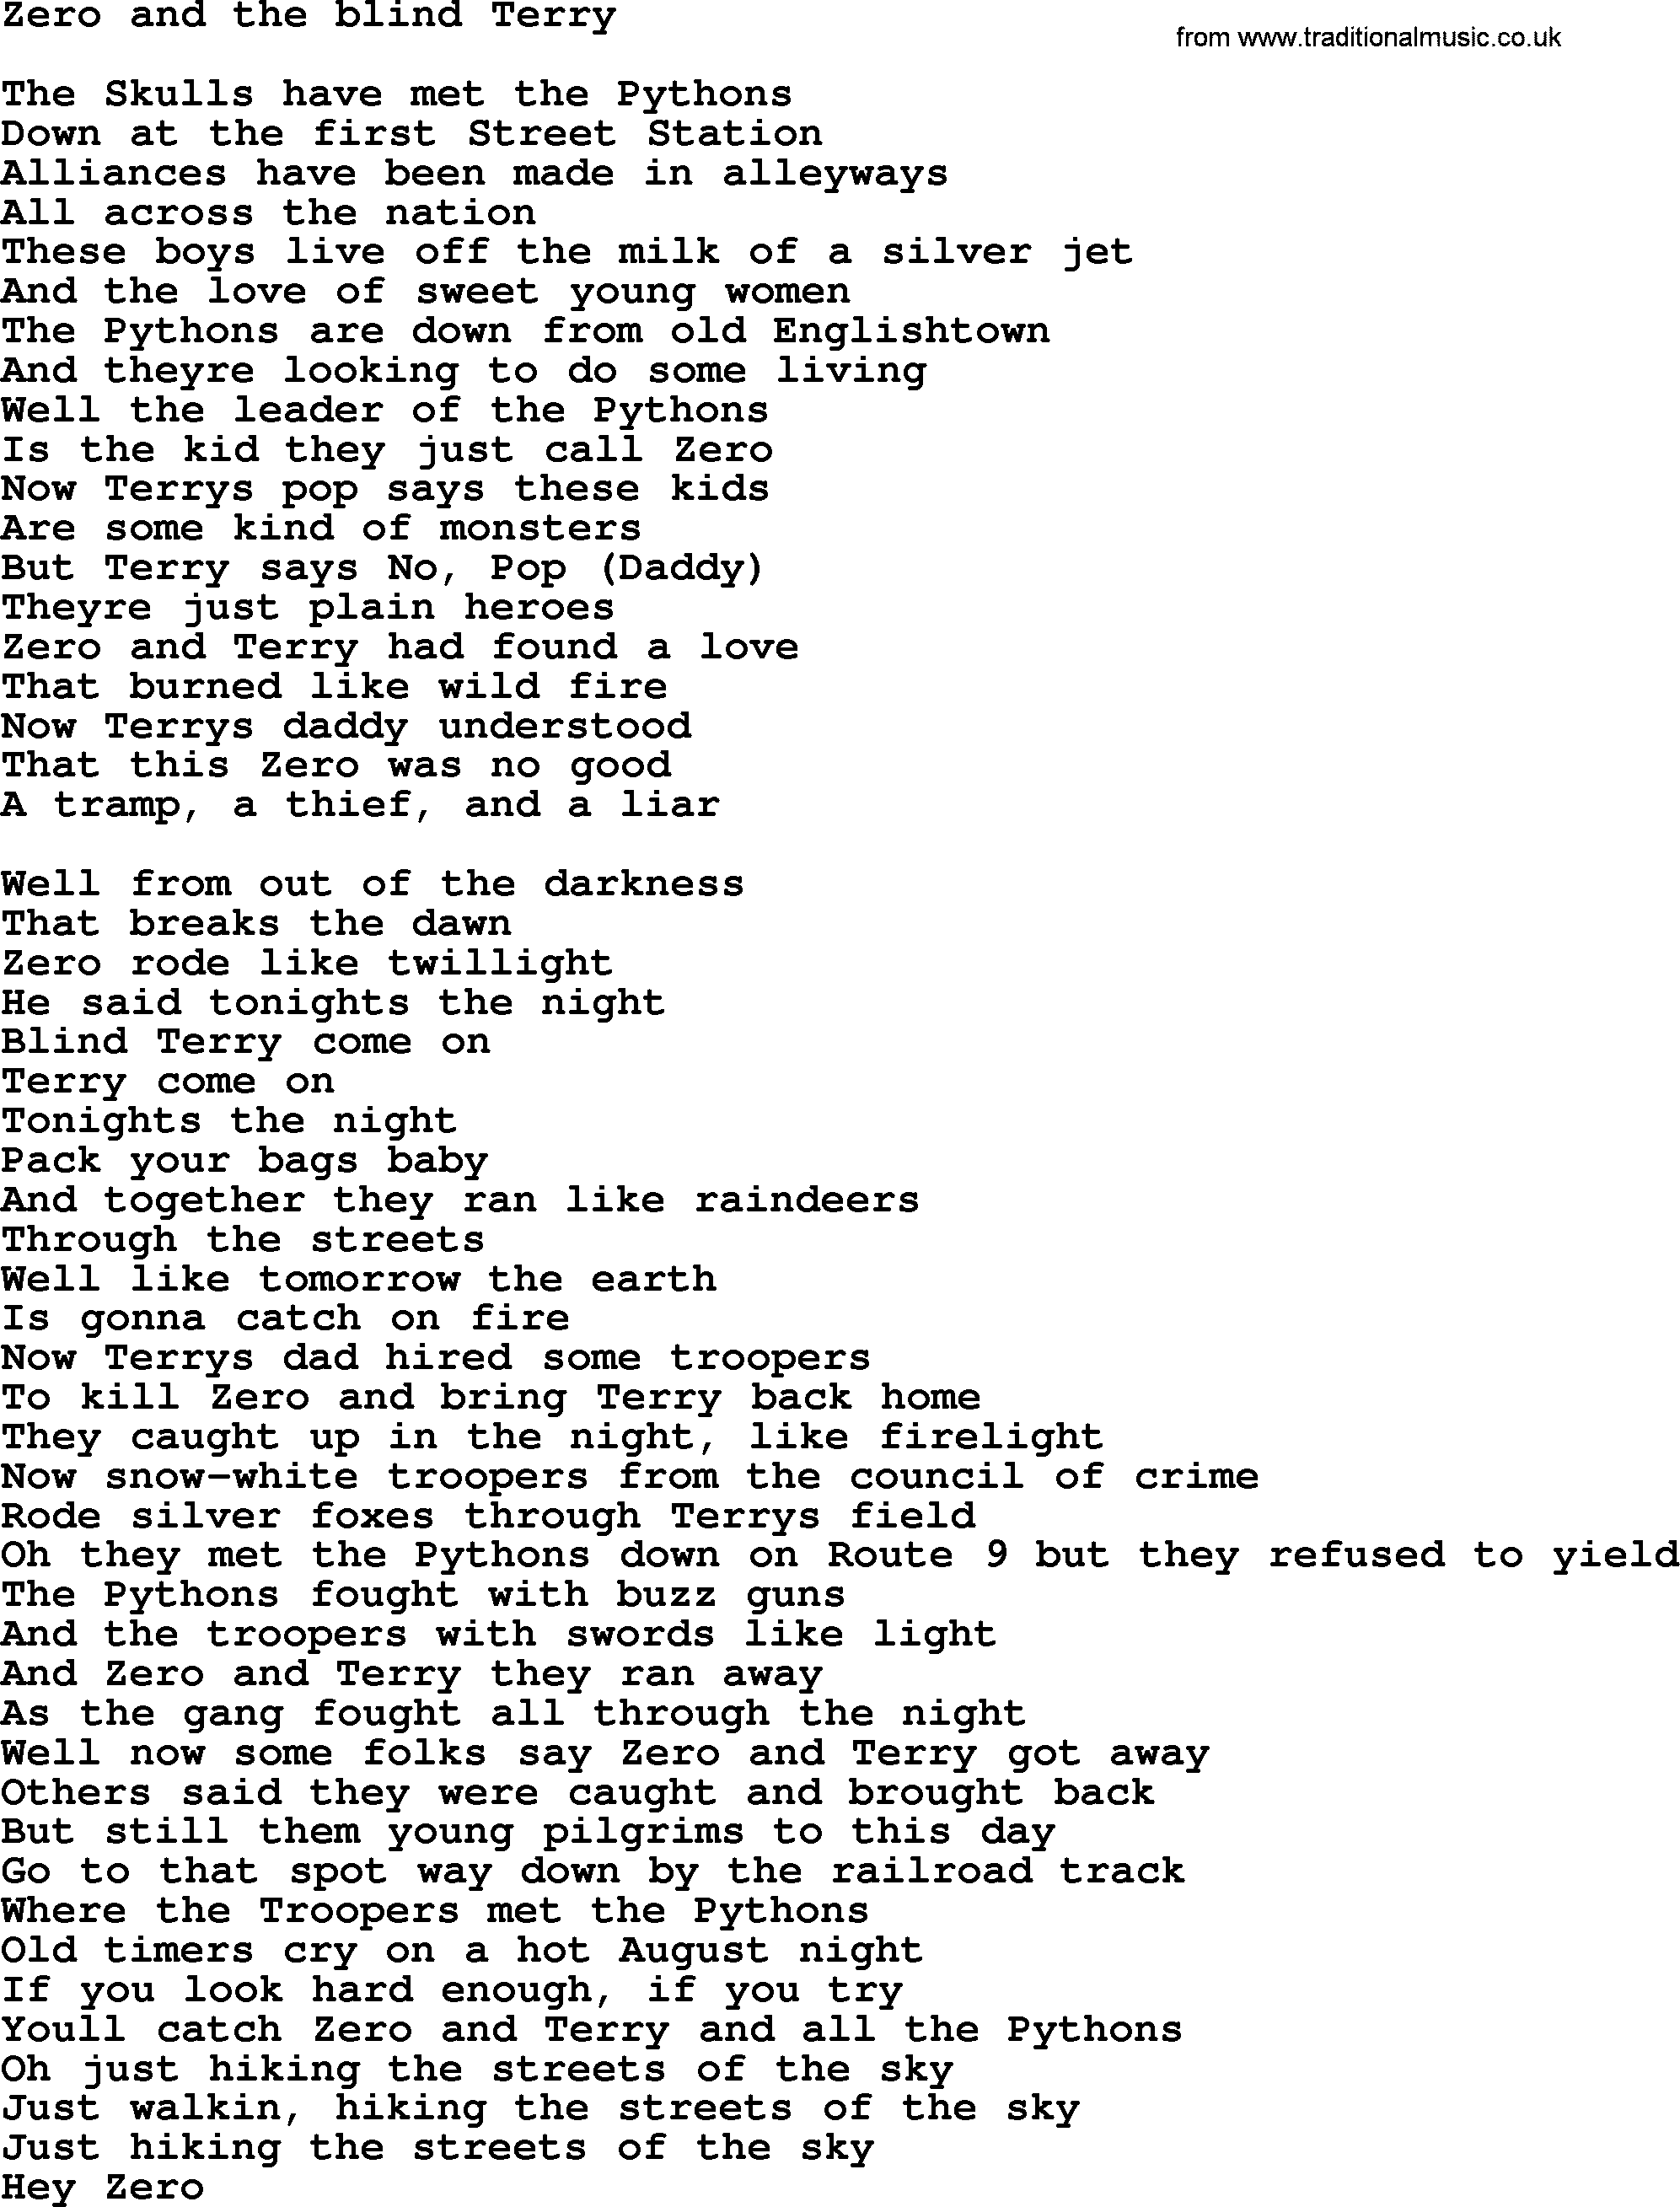 Bruce Springsteen song: Zero And The Blind Terry lyrics